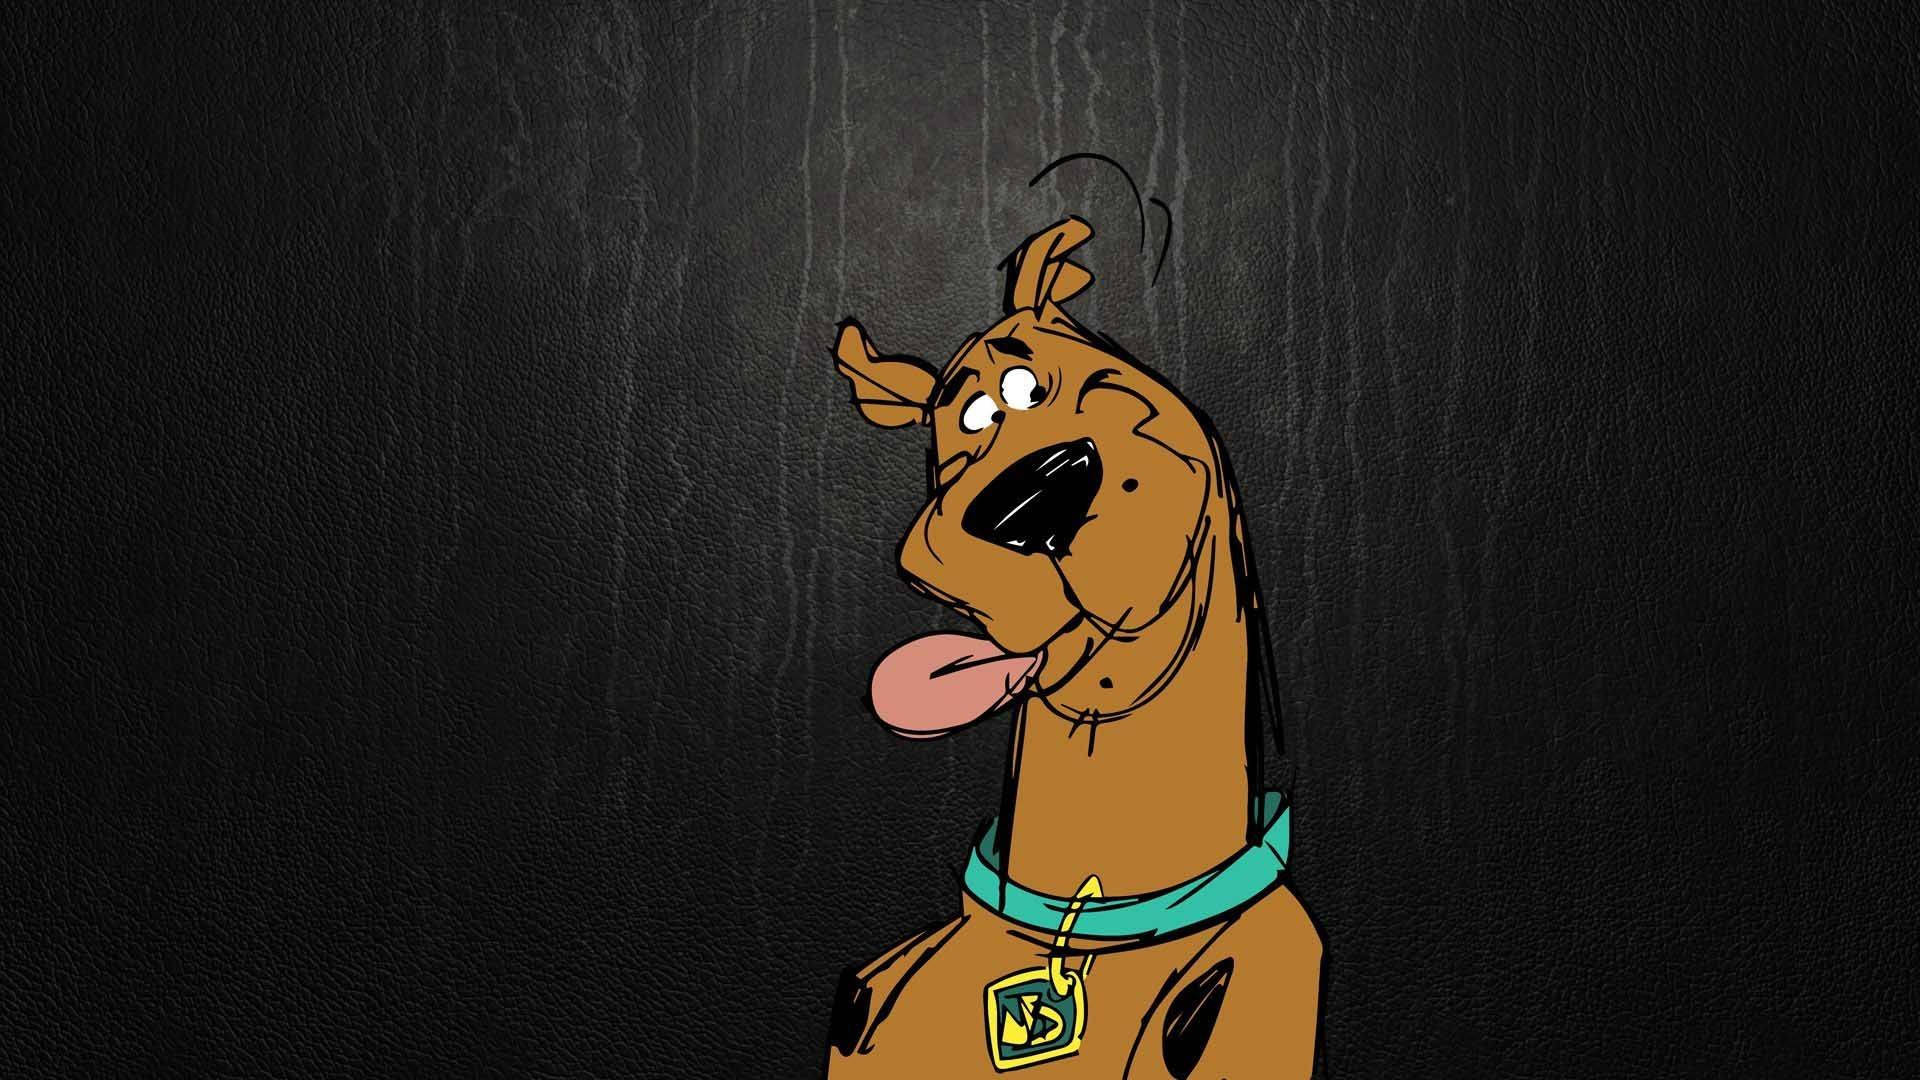 Top 999+ Scooby Doo Wallpapers Full HD, 4K✅Free to Use